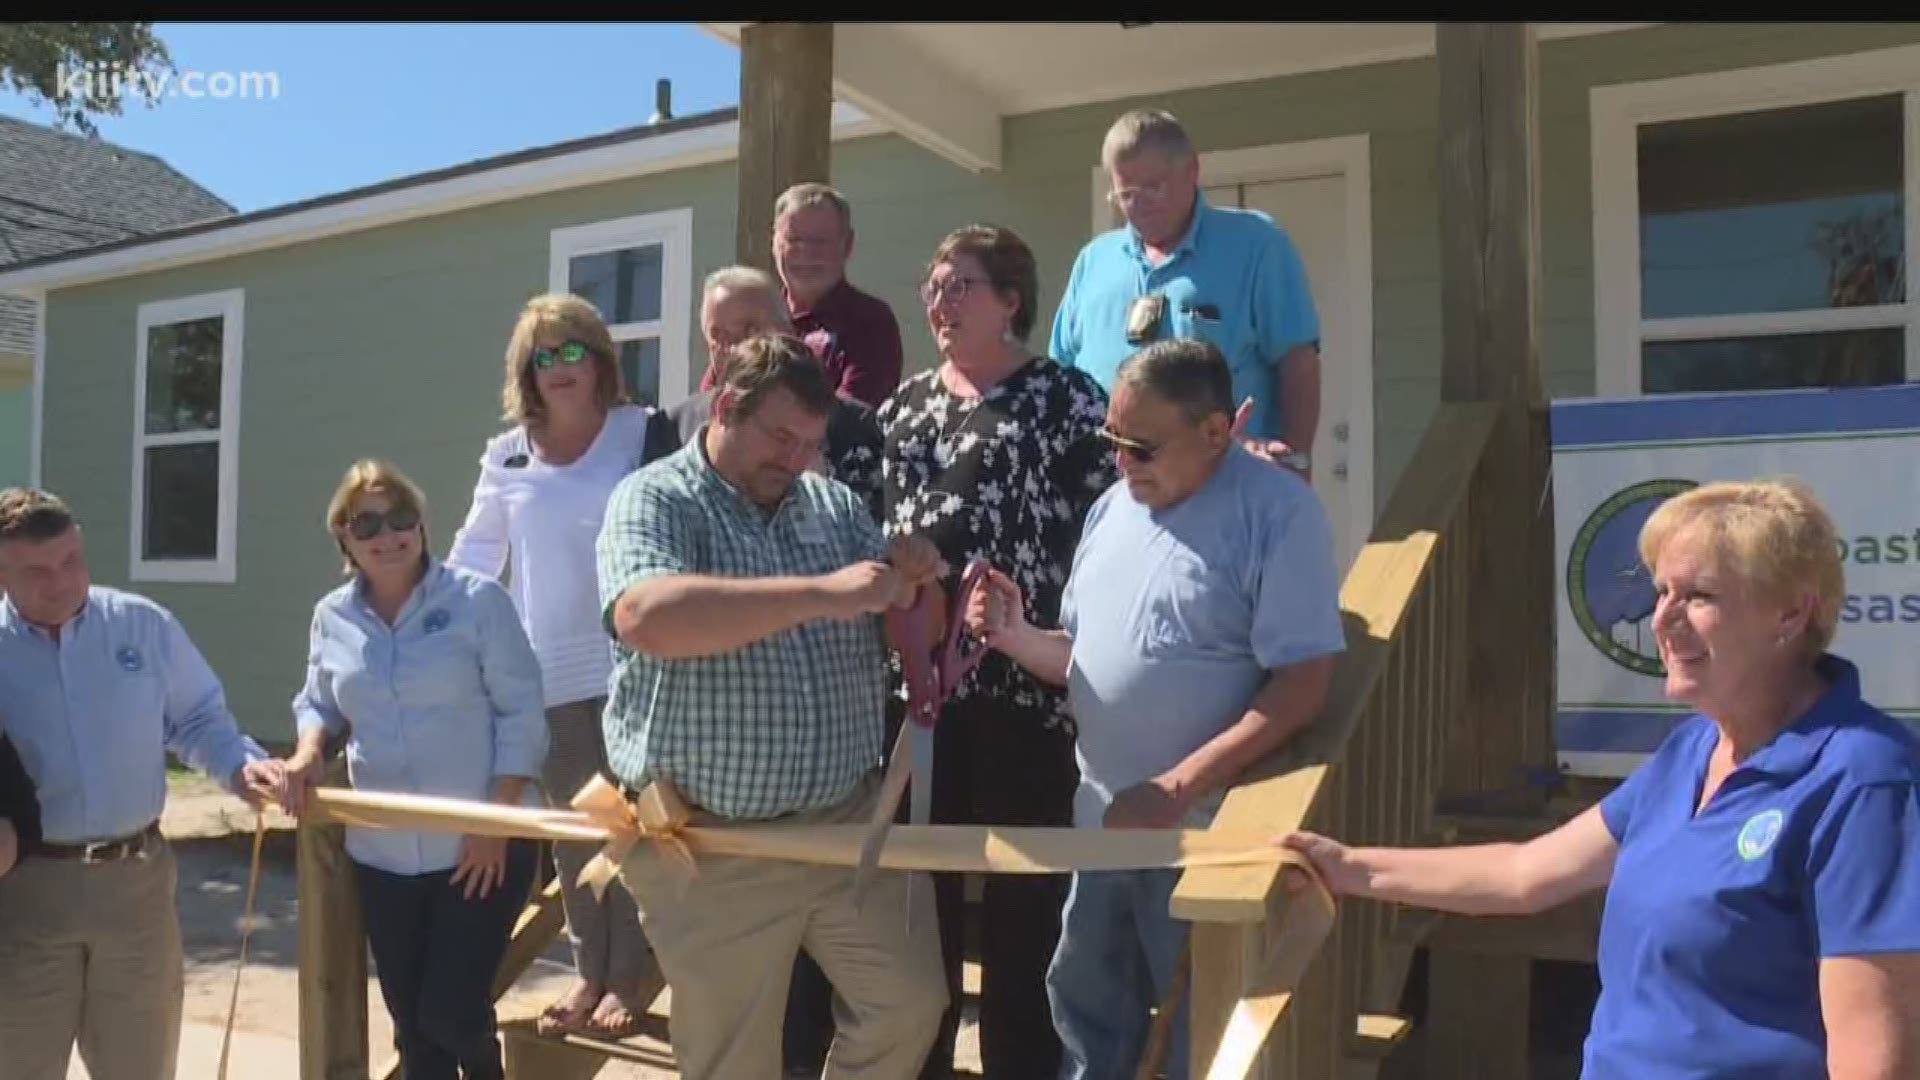 The Coastal Bend Disaster Recovery Group built a house from the bottom up for a man who lost everything during Hurricane Harvey.